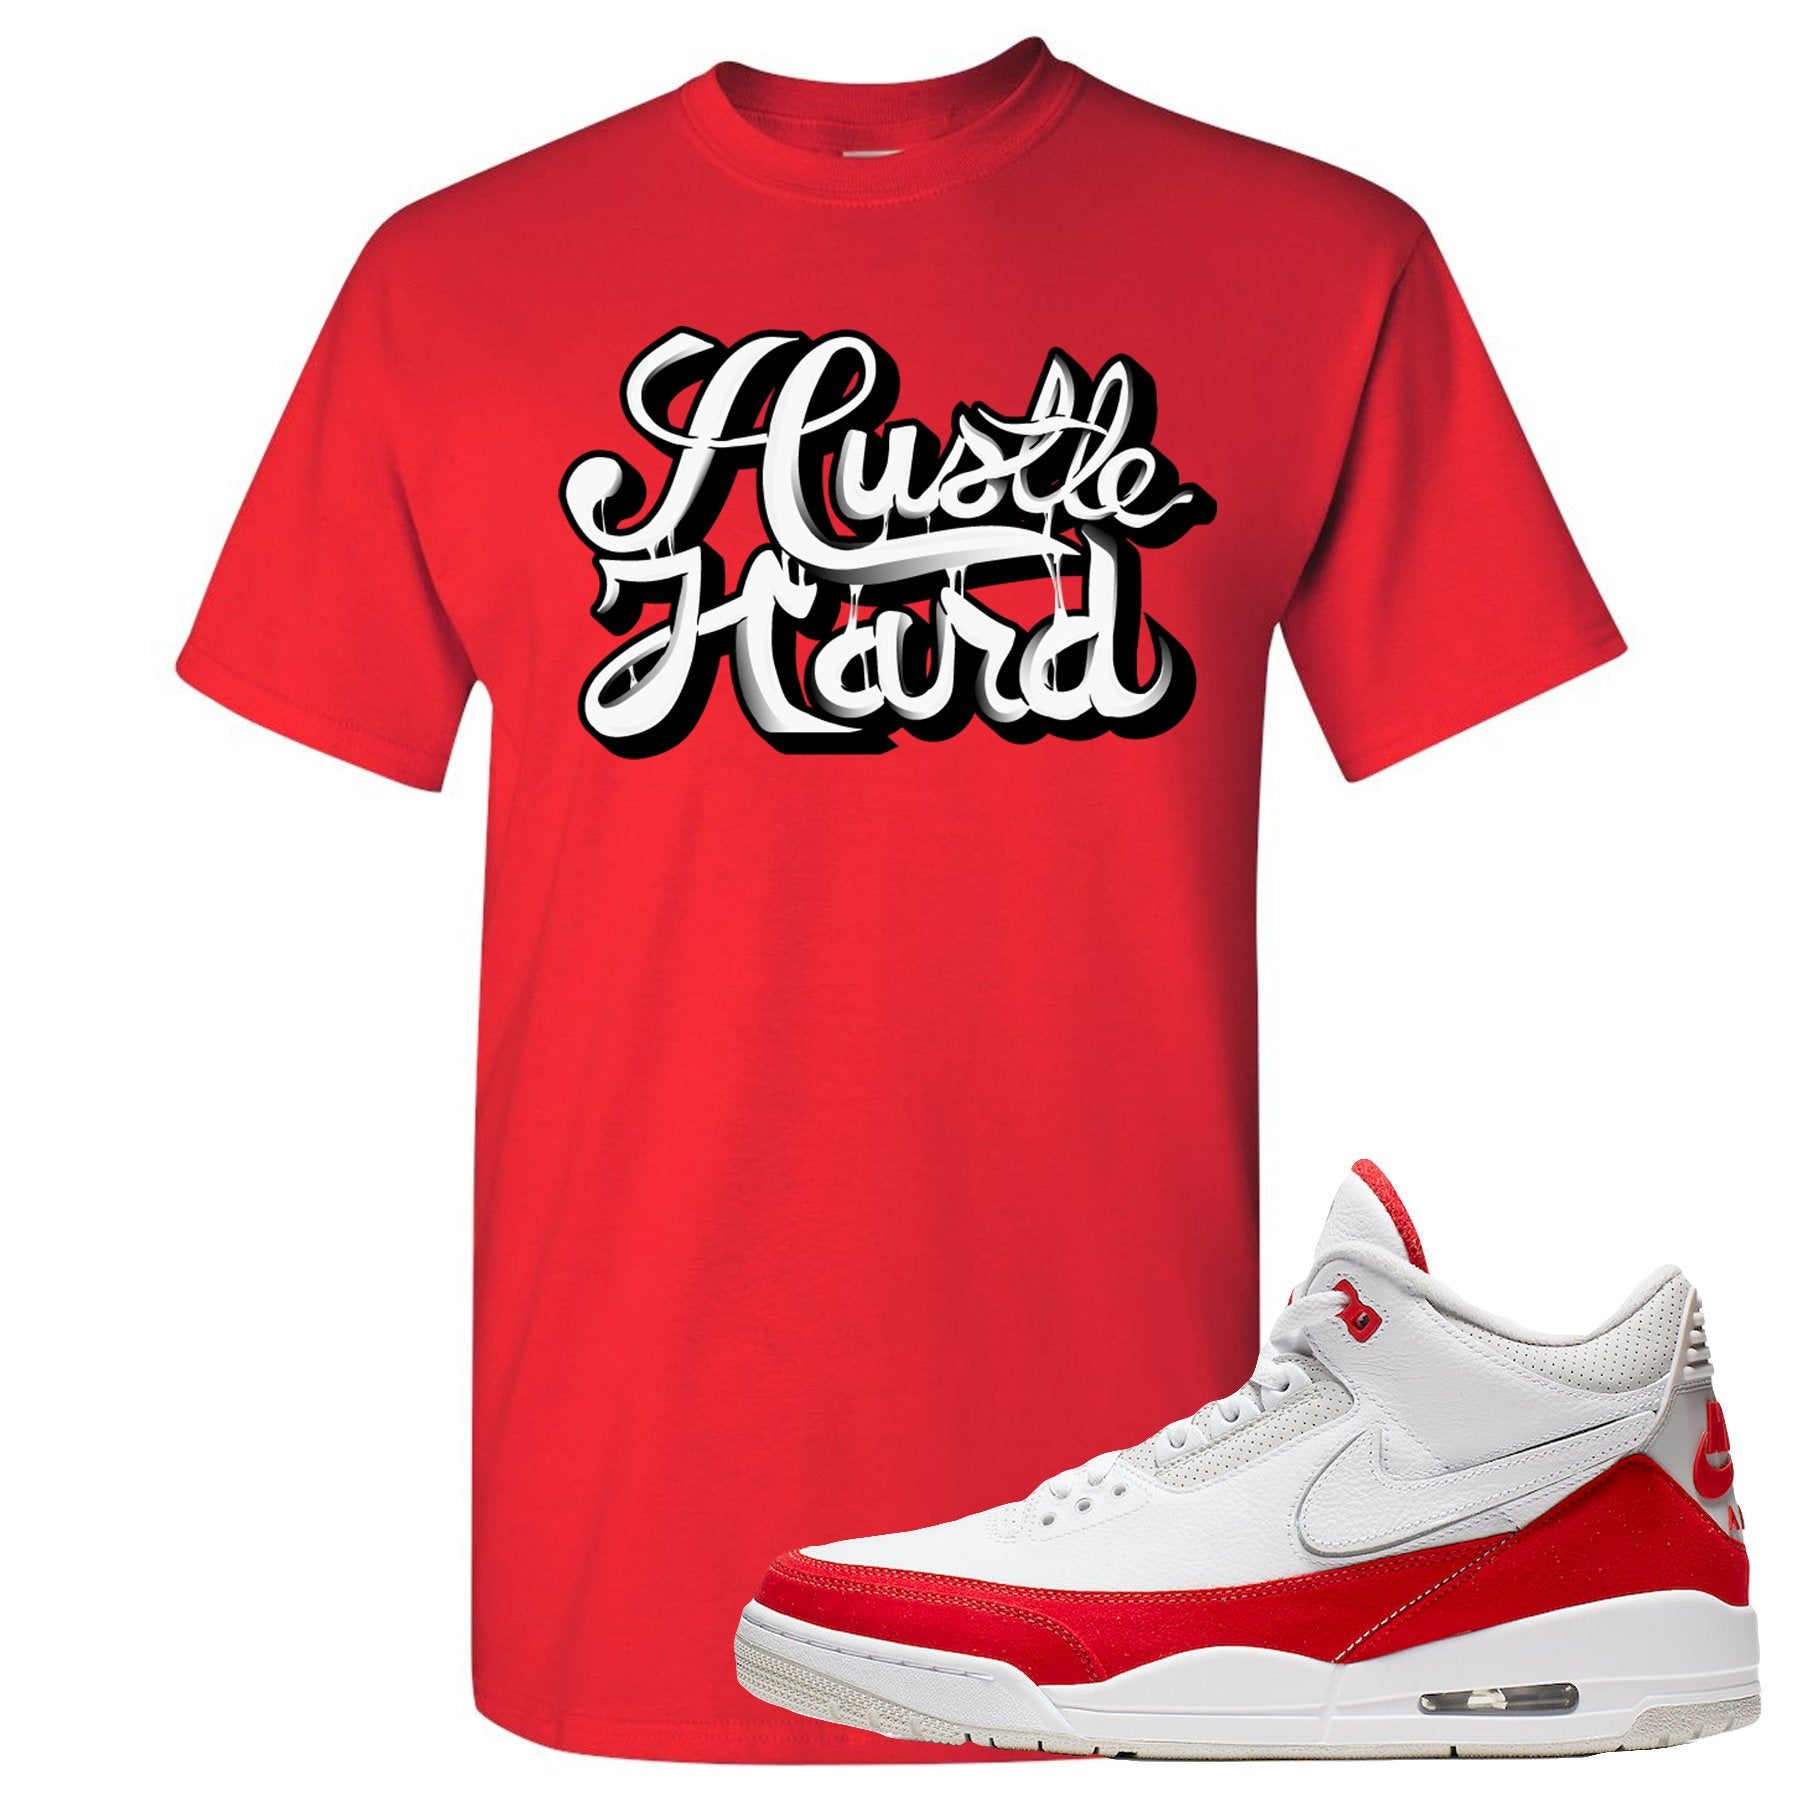 This red and white t-shirt will match great with your Jordan 3 Tinker Air Max shoes